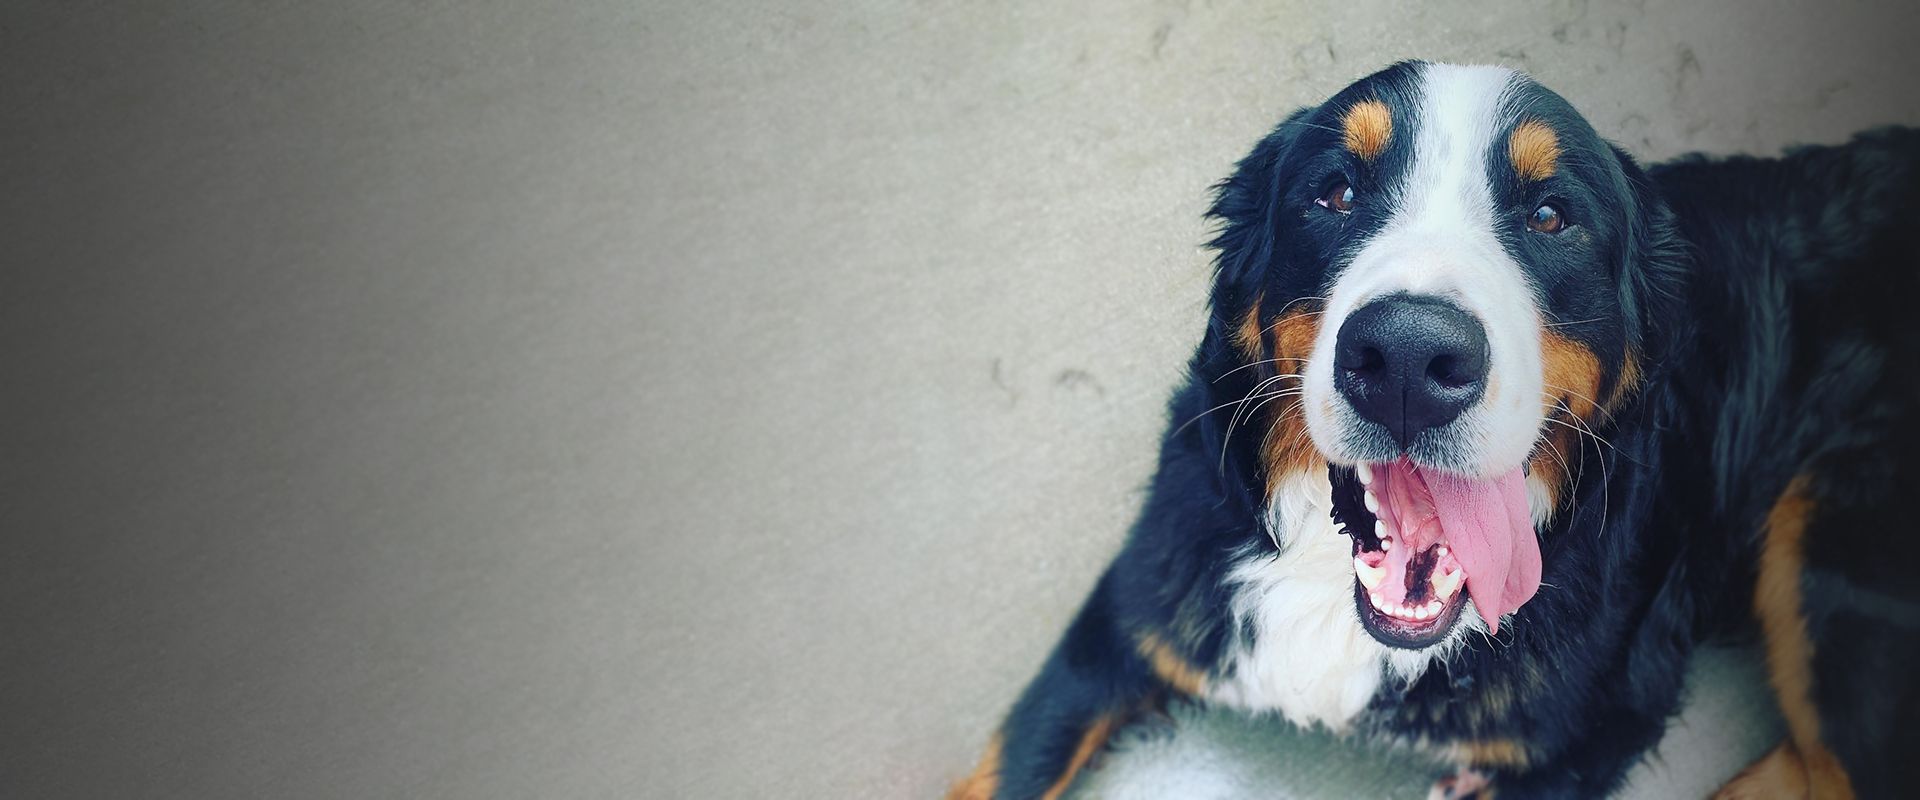 smiling bernese mountain dog lying on the floor looking at the camera 